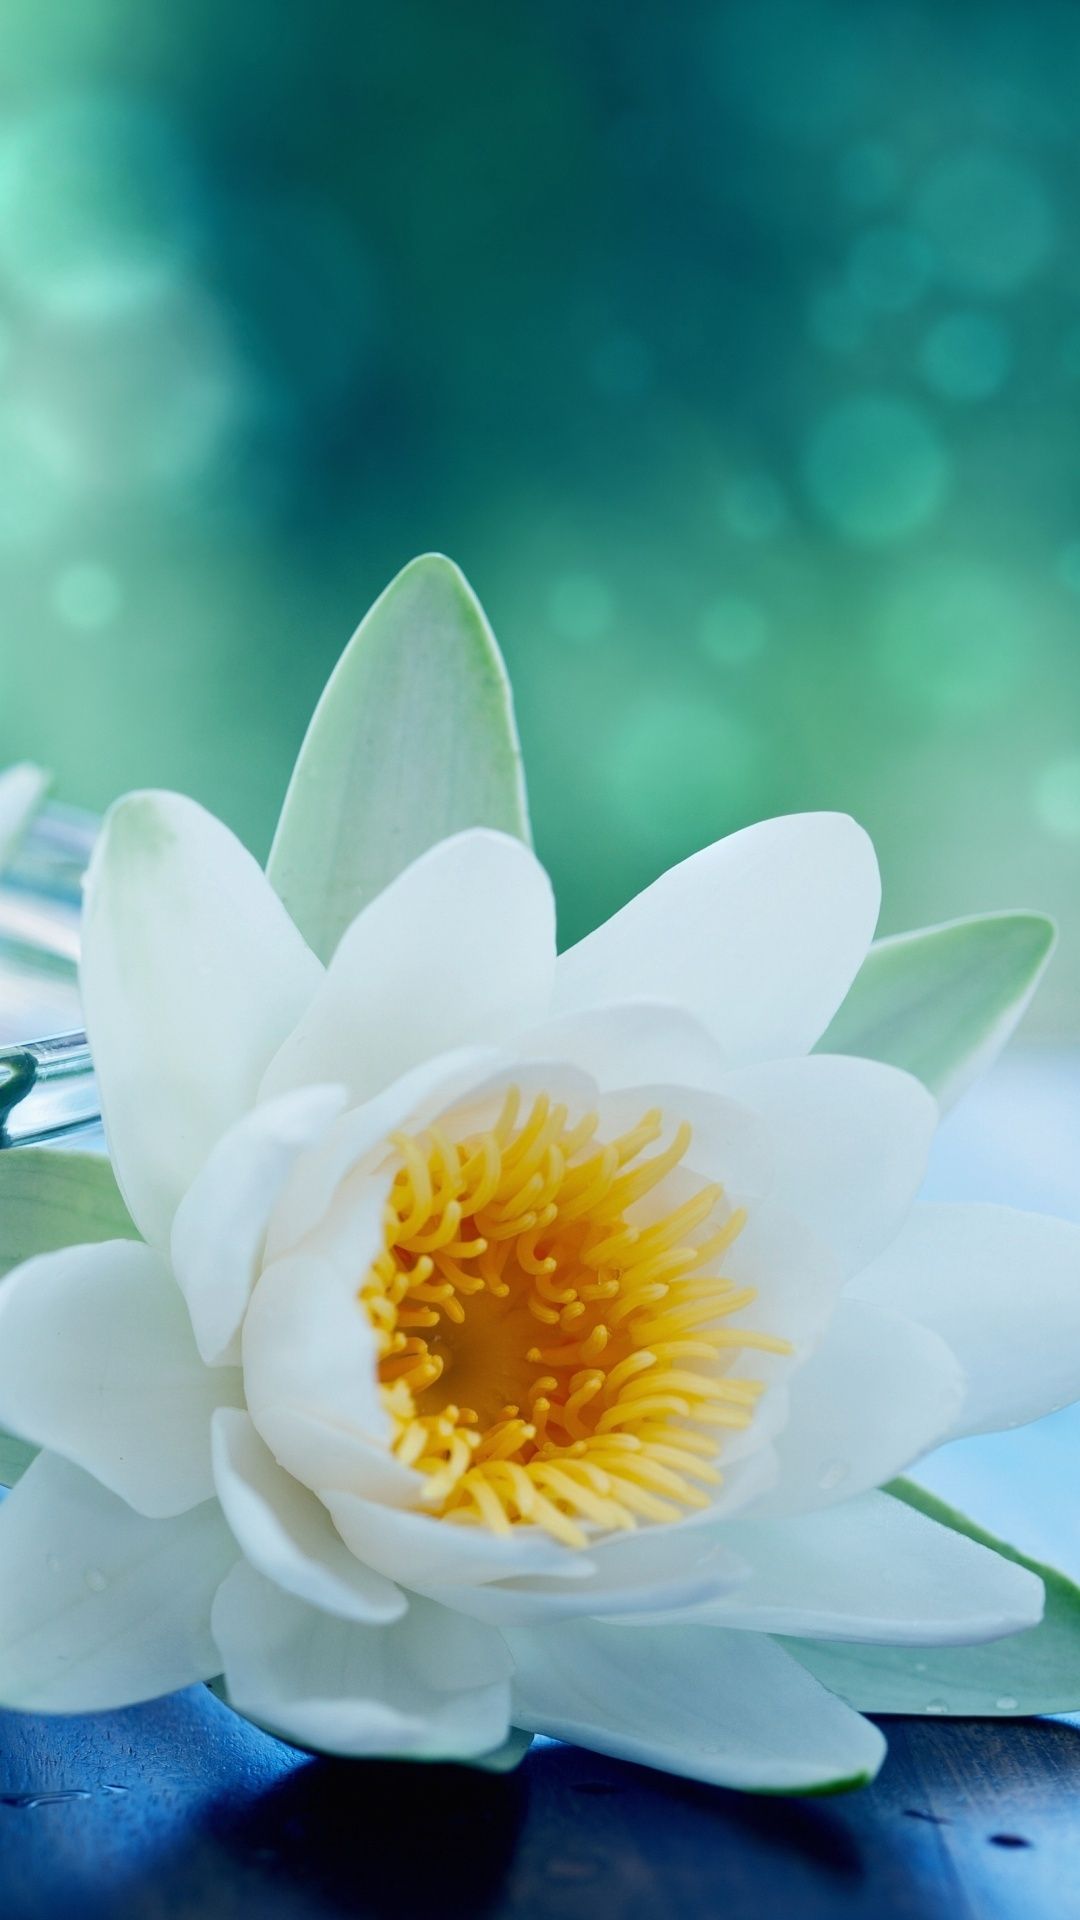 Android Best Wallpaper: White Lotus Flower Android Best Wallpaper